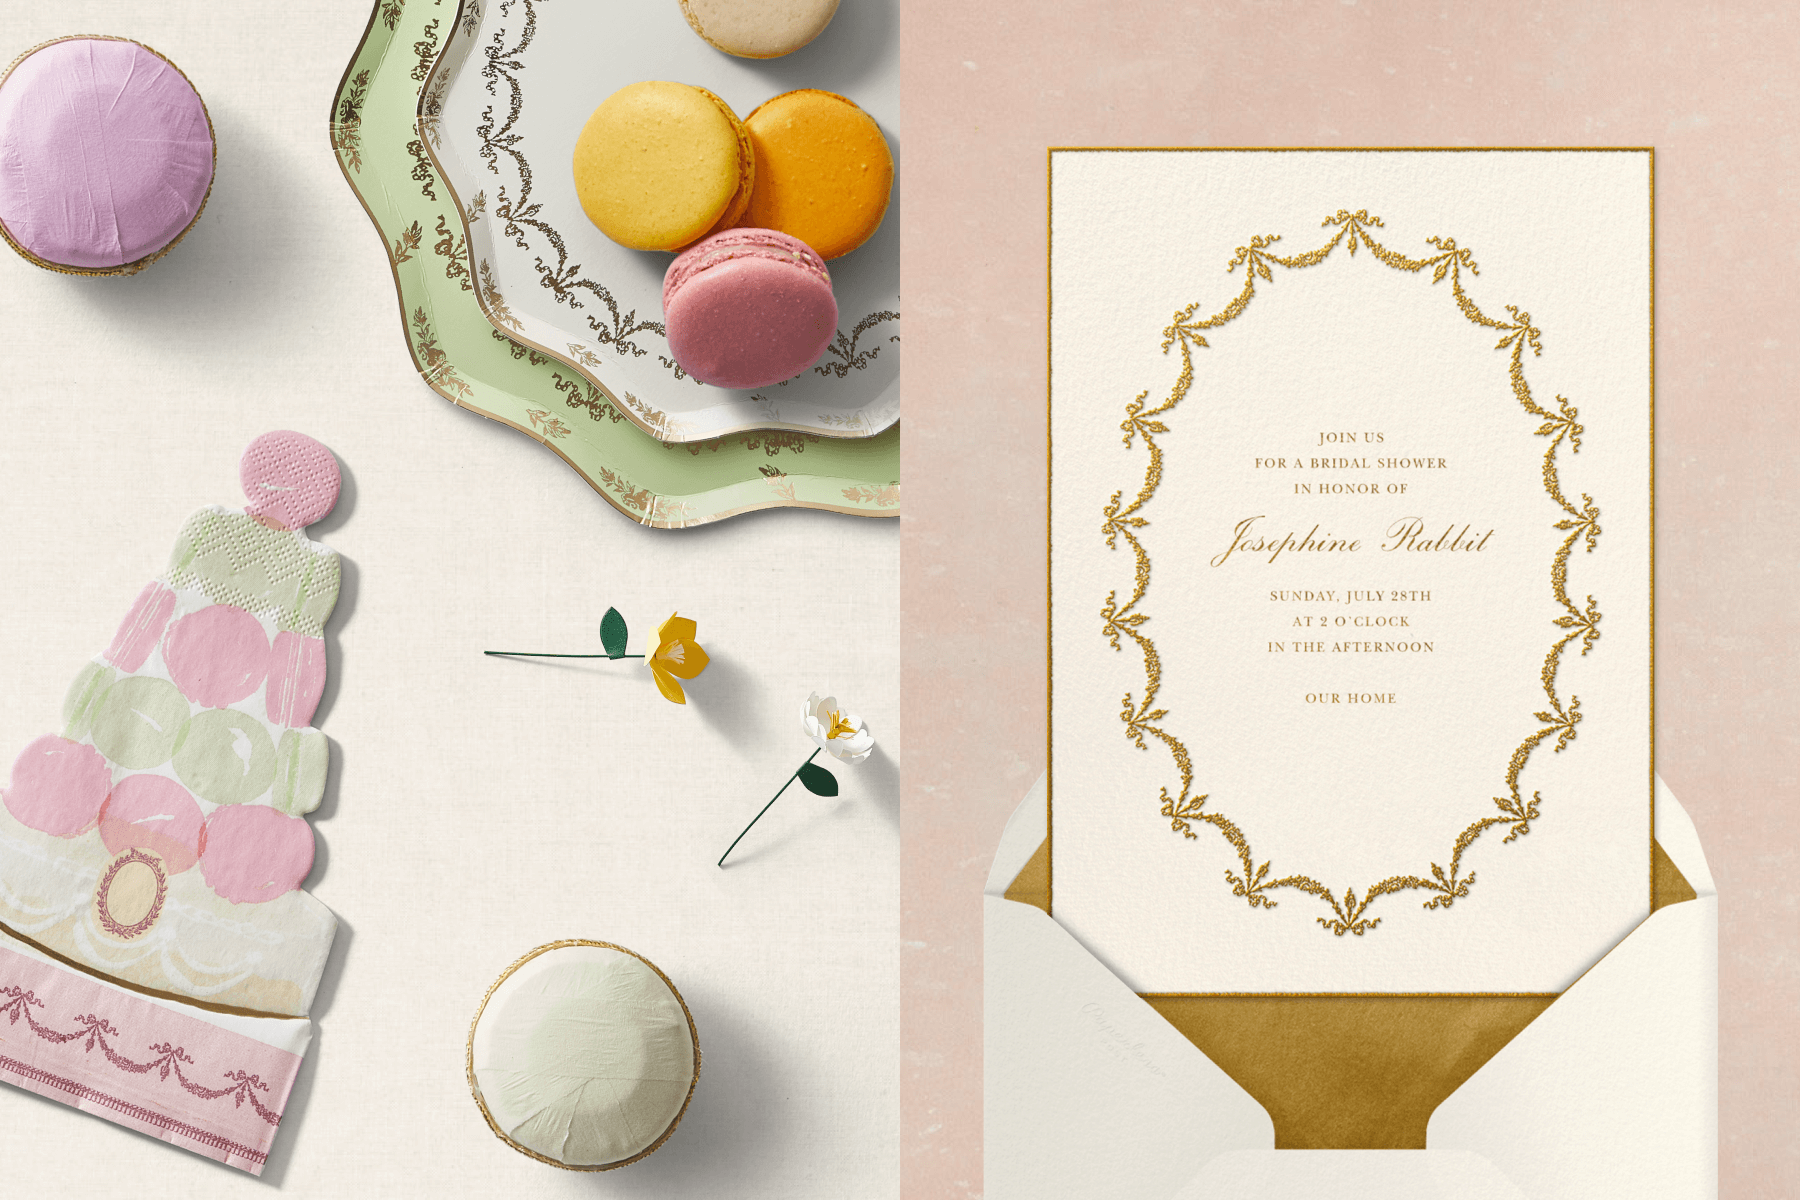 left: Macaron-themed party supplies including napkins, plates, and surprise ball favors. Right: A bridal shower invitation with a gold filigree swag oval around the event details.